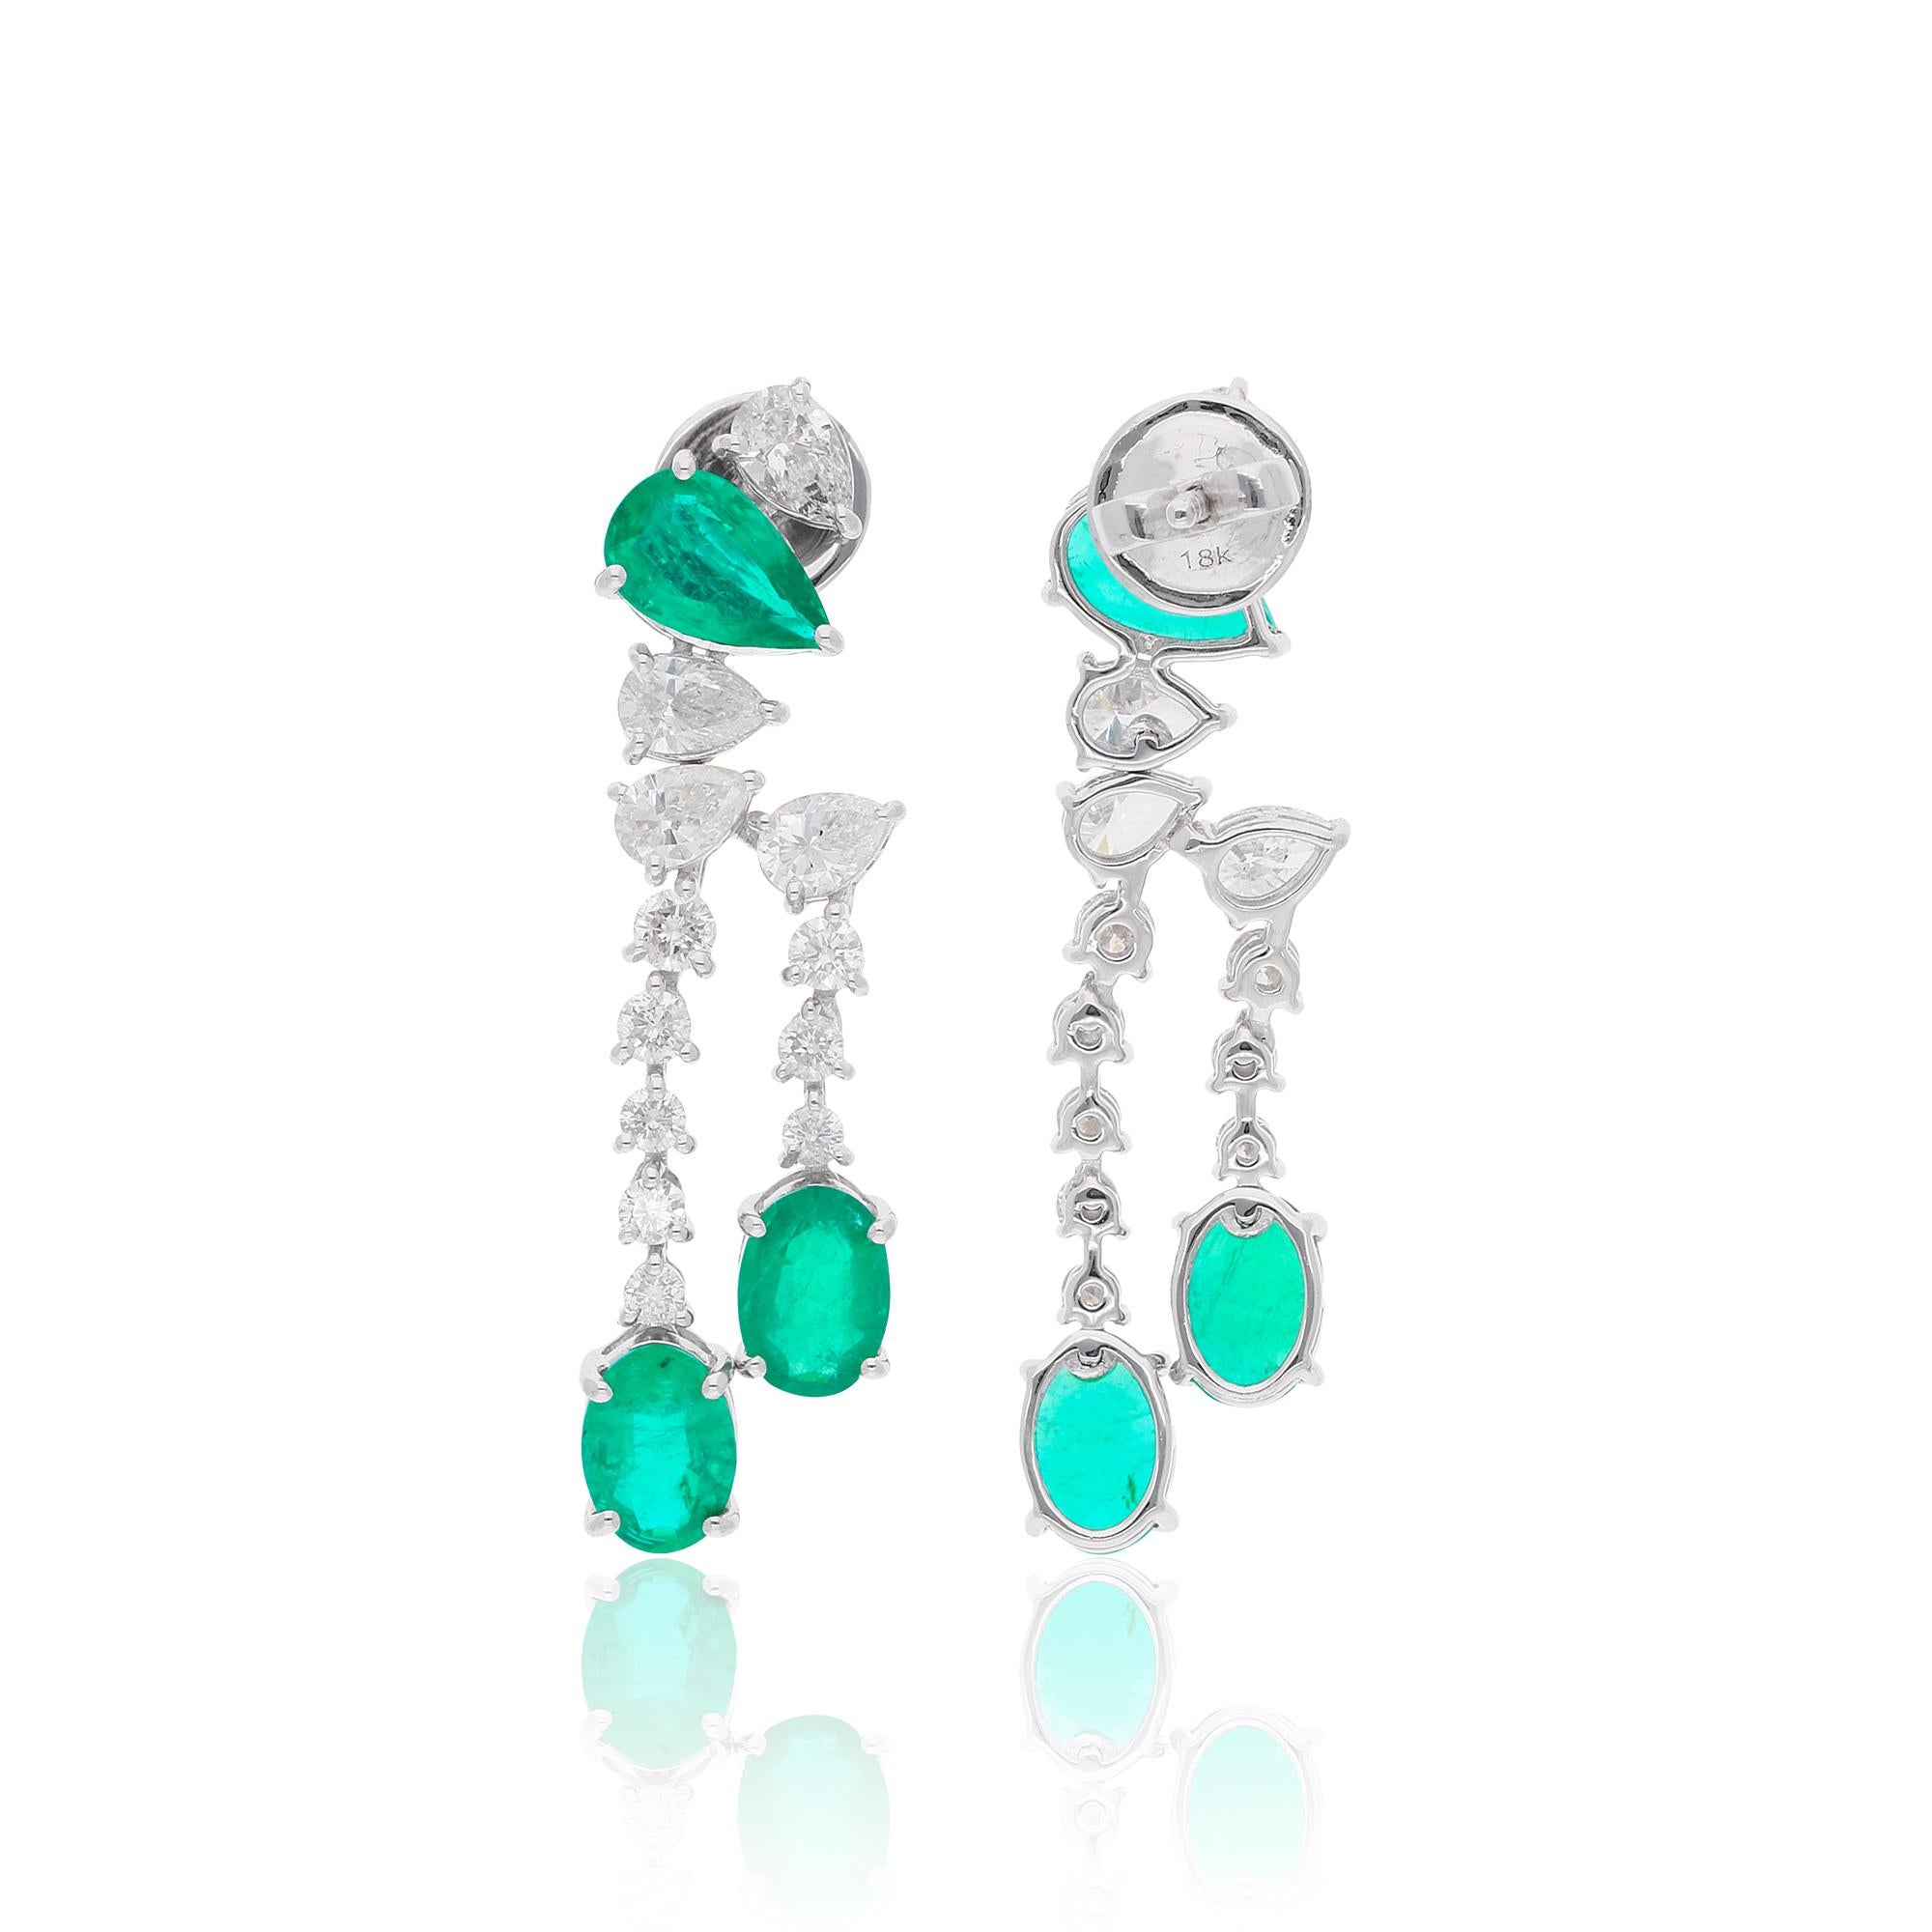 Item Code :- SEE-13038
Gross Wt. :- 6.90 gm
18k White Gold Wt. :- 5.67 gm
Natural Diamond Wt. :- 2.14 Ct. ( AVERAGE DIAMOND CLARITY SI1-SI2 & COLOR H-I )
Emerald Wt. :- 4.00 Ct.
Earrings Size :- 35 mm approx.

✦ Sizing
.....................
We can